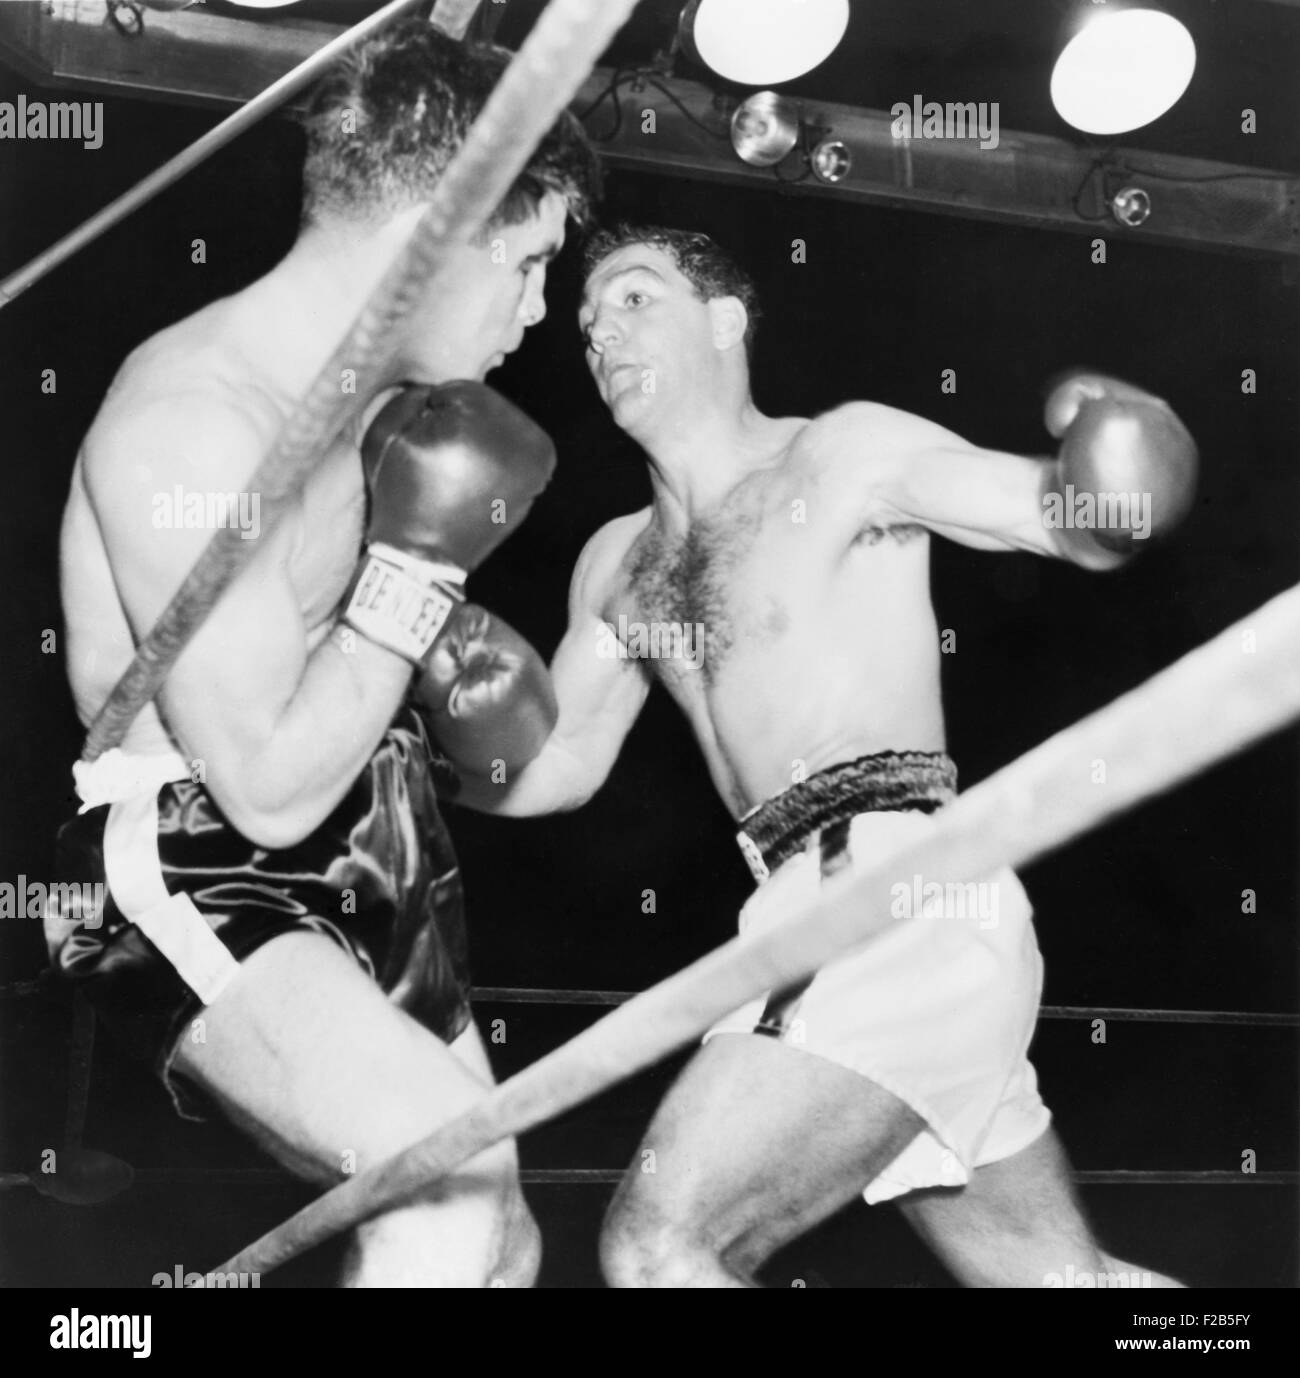 Heavyweight champion Rocky Marciano (right) backs Roland LaStarza against the ropes. Sept. 24, 1953. LaStarza lost the fight and became an actor and played 'tough guy' roles. He appeared in movies Point Blank (1967) and The Outfit (1973). - (BSLOC 2014 17 157) Stock Photo